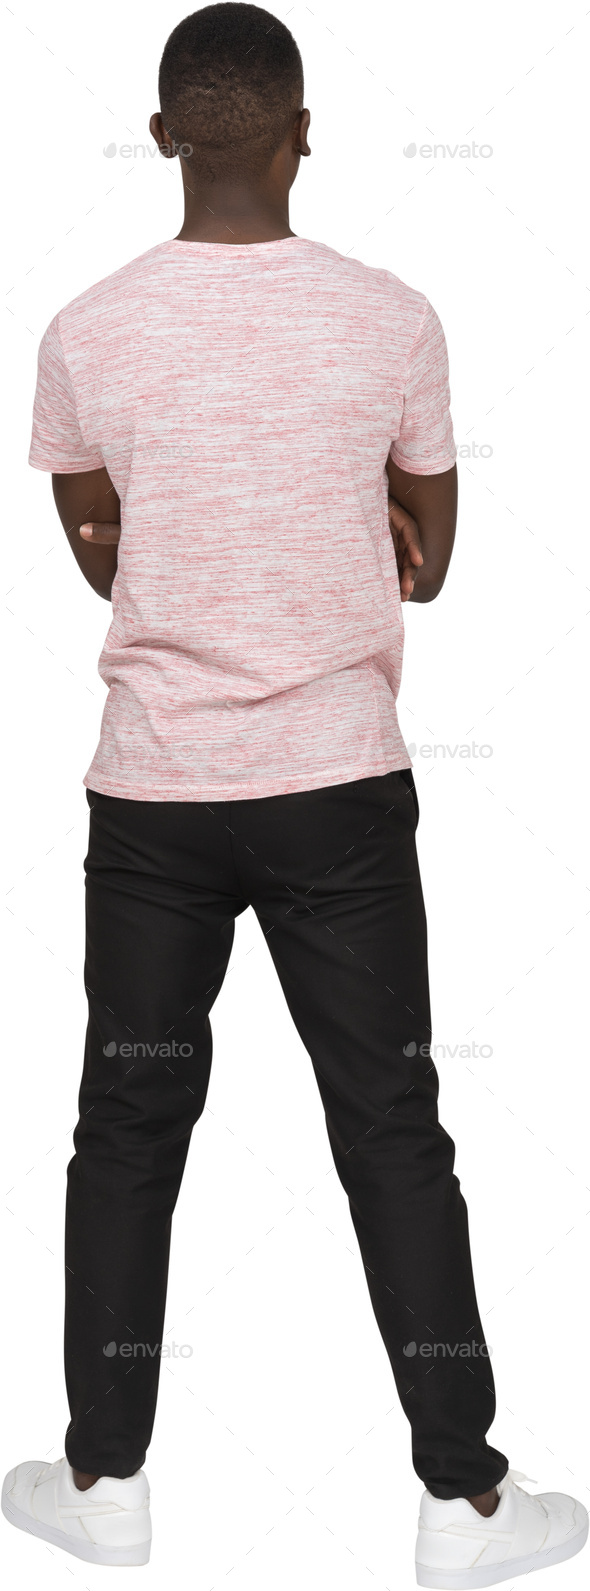 a young man wearing a pink shirt and black pants - Stock Photo - Images